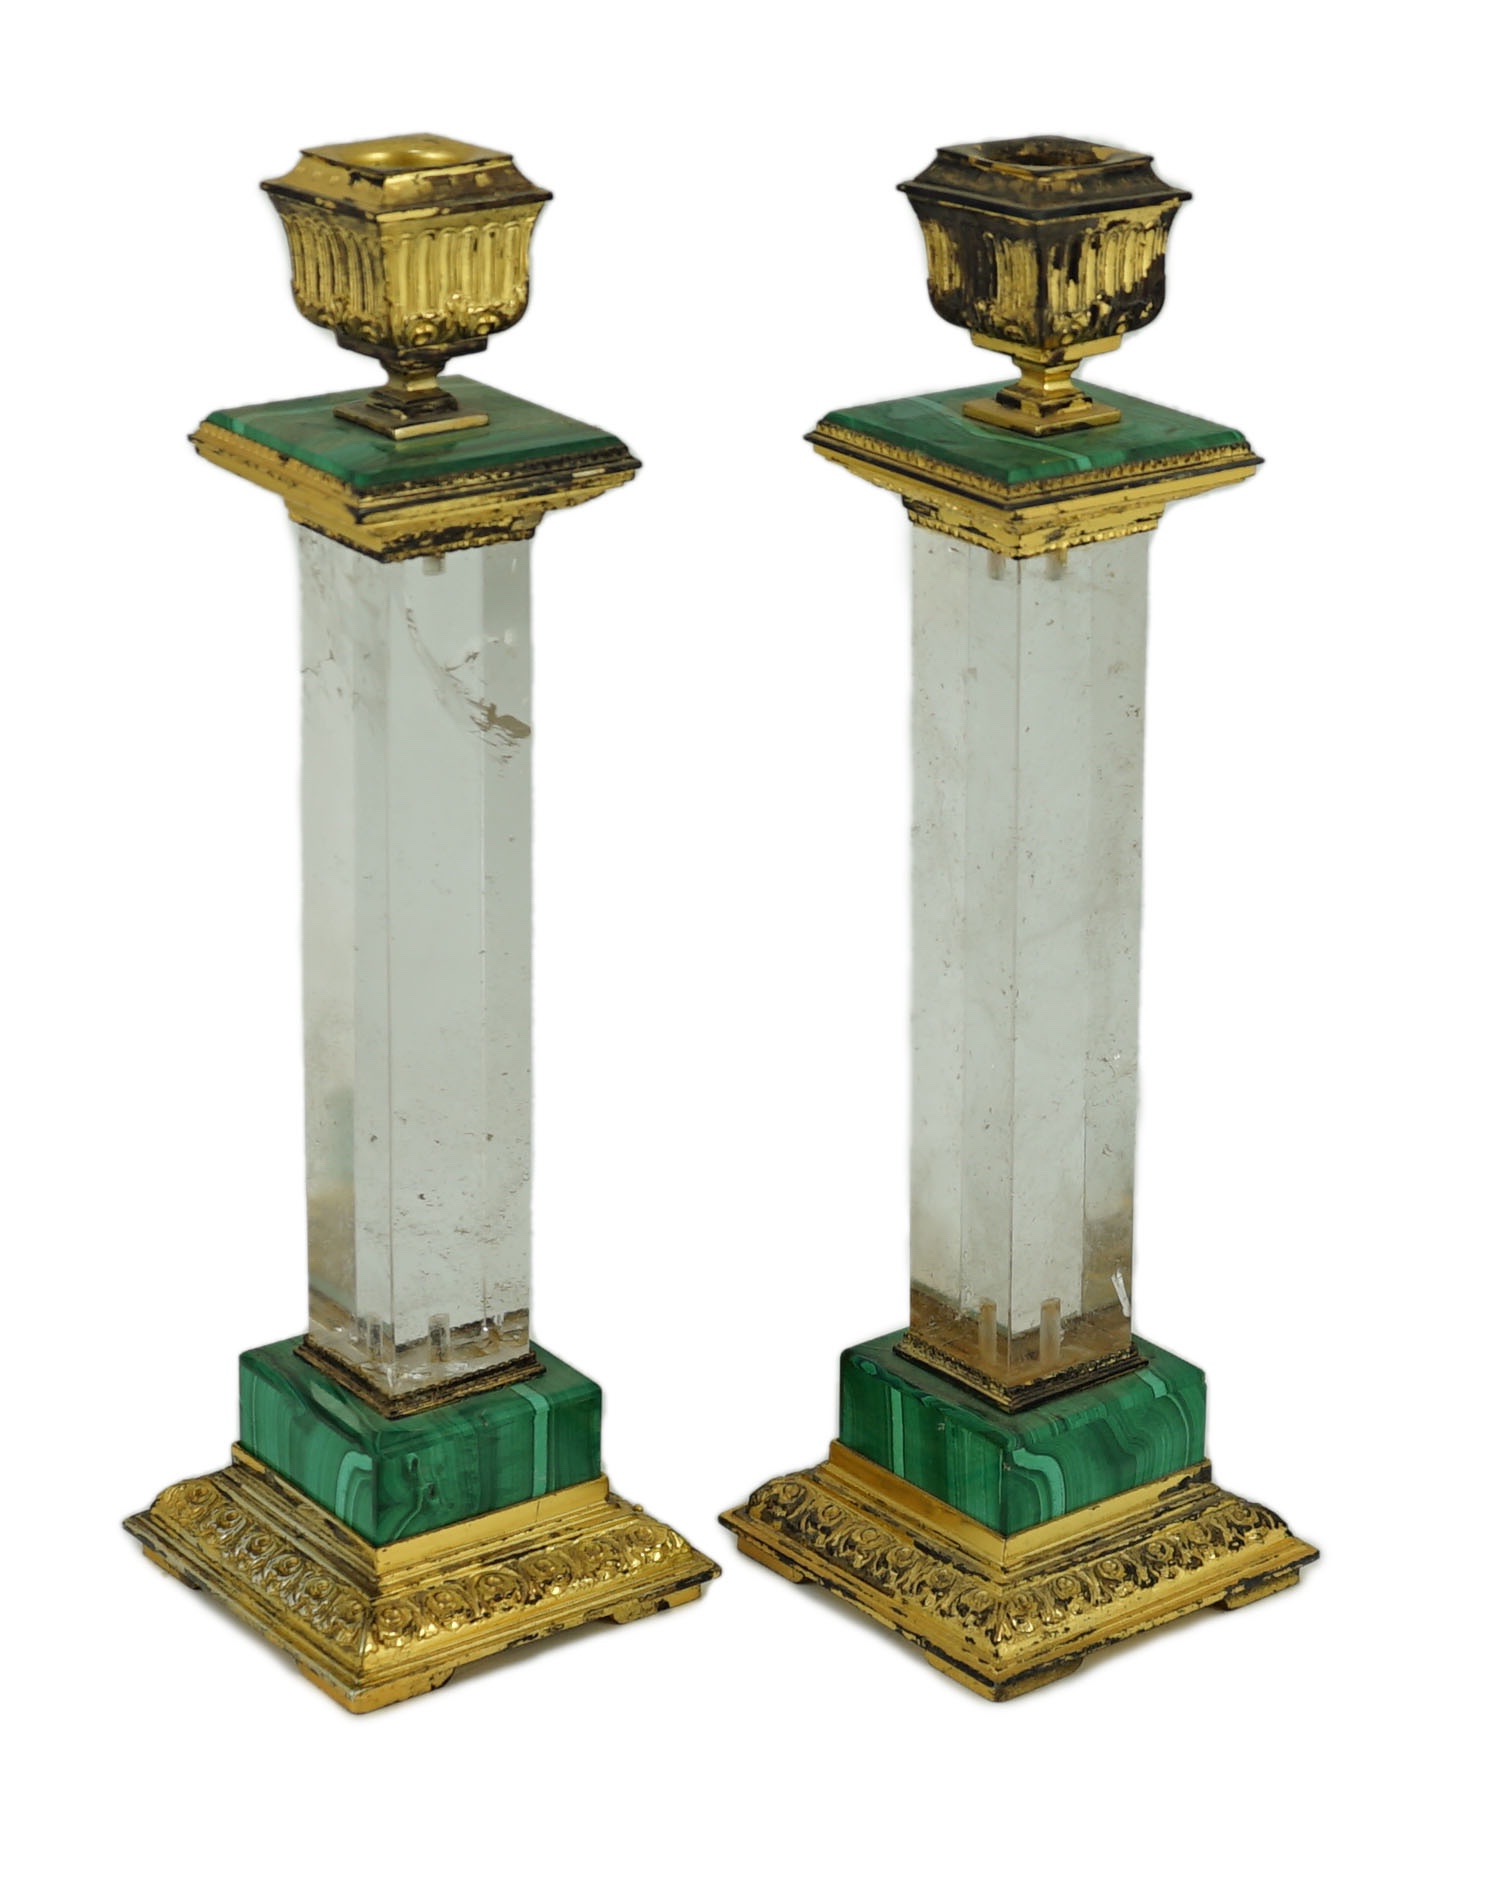 A pair of 20th century Italian 800 standard silver gilt and malachite mounted rock crystal candlesticks